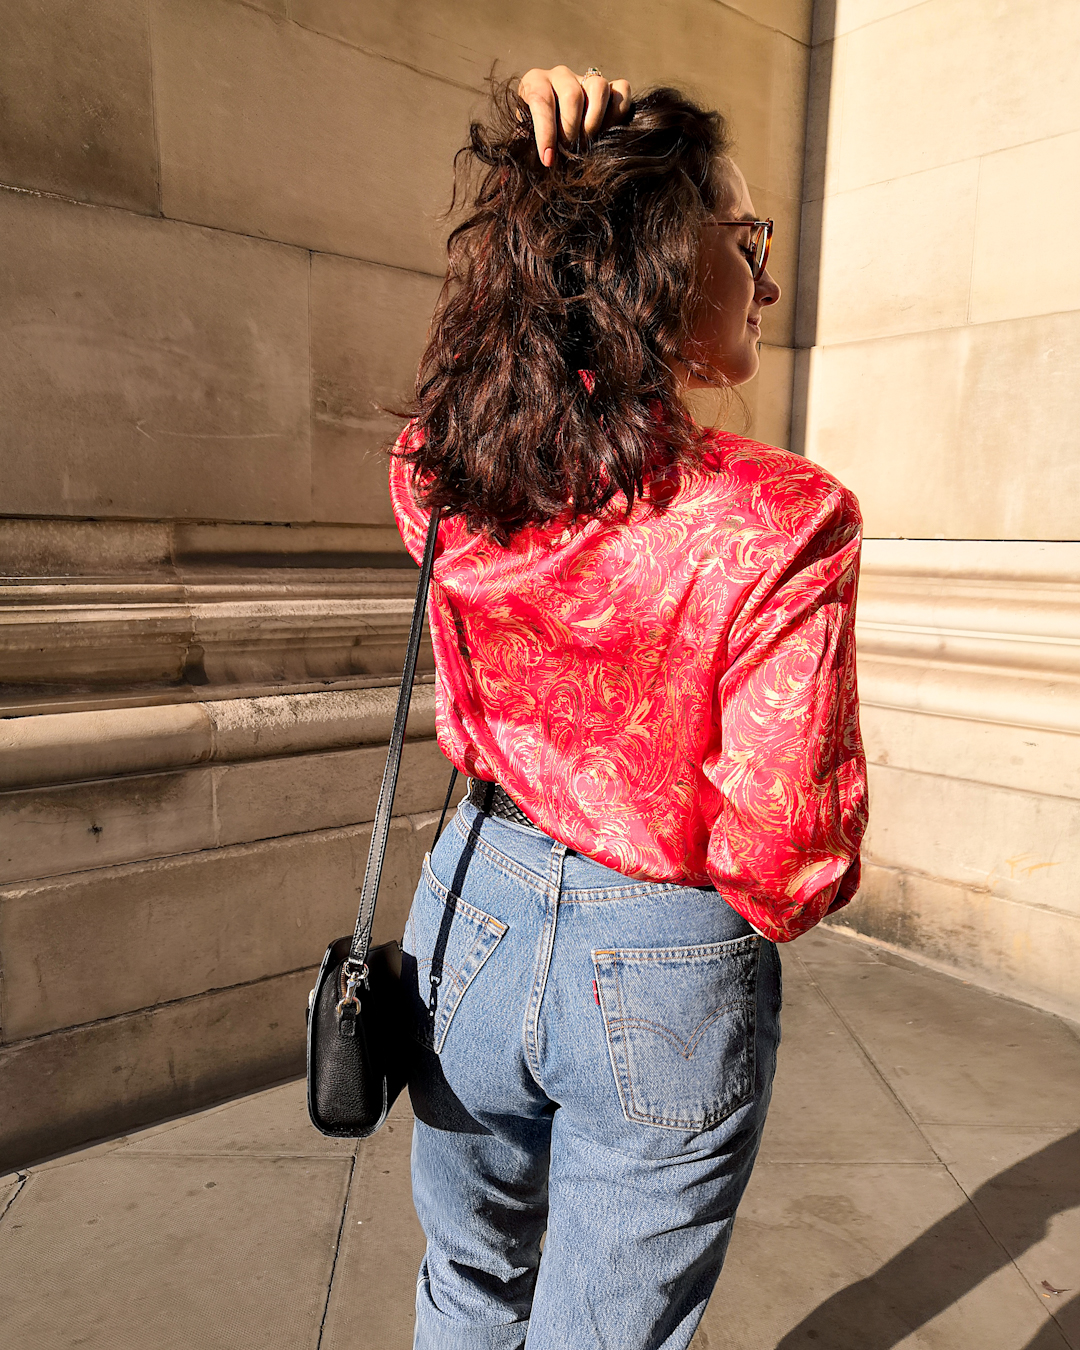 Katie wears a red and gold patterned blouse with high waisted denim cuffed above the her Dr Martens boots. Her hair is down and wavy. She's standing in front of a stone wall with minimal details.